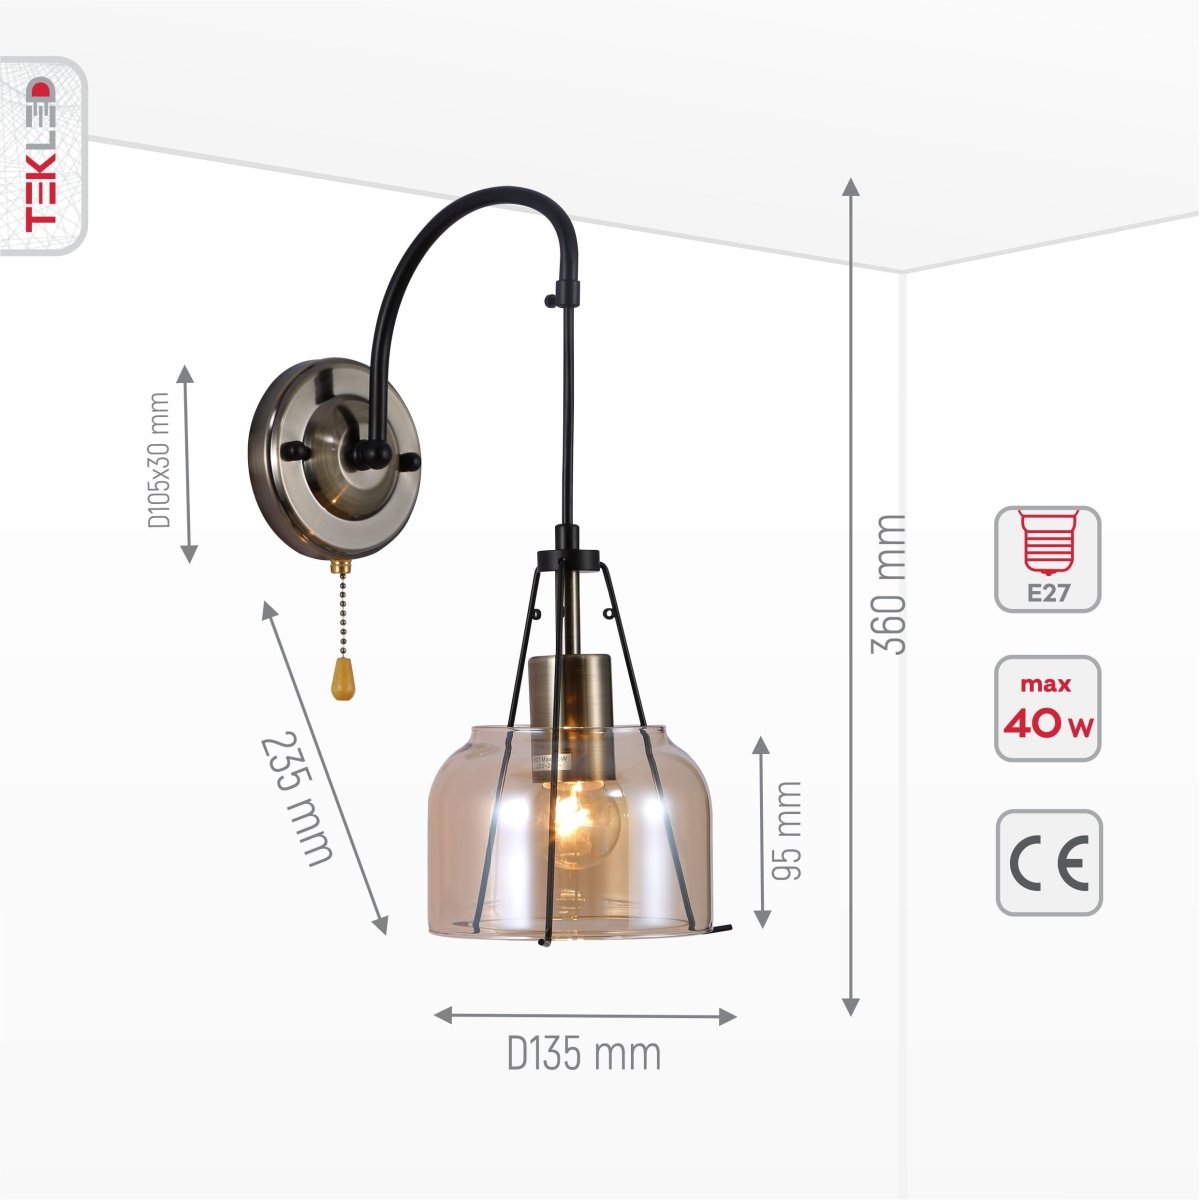 Product dimensions of amber glass pendant wall light e27 and pull down switch